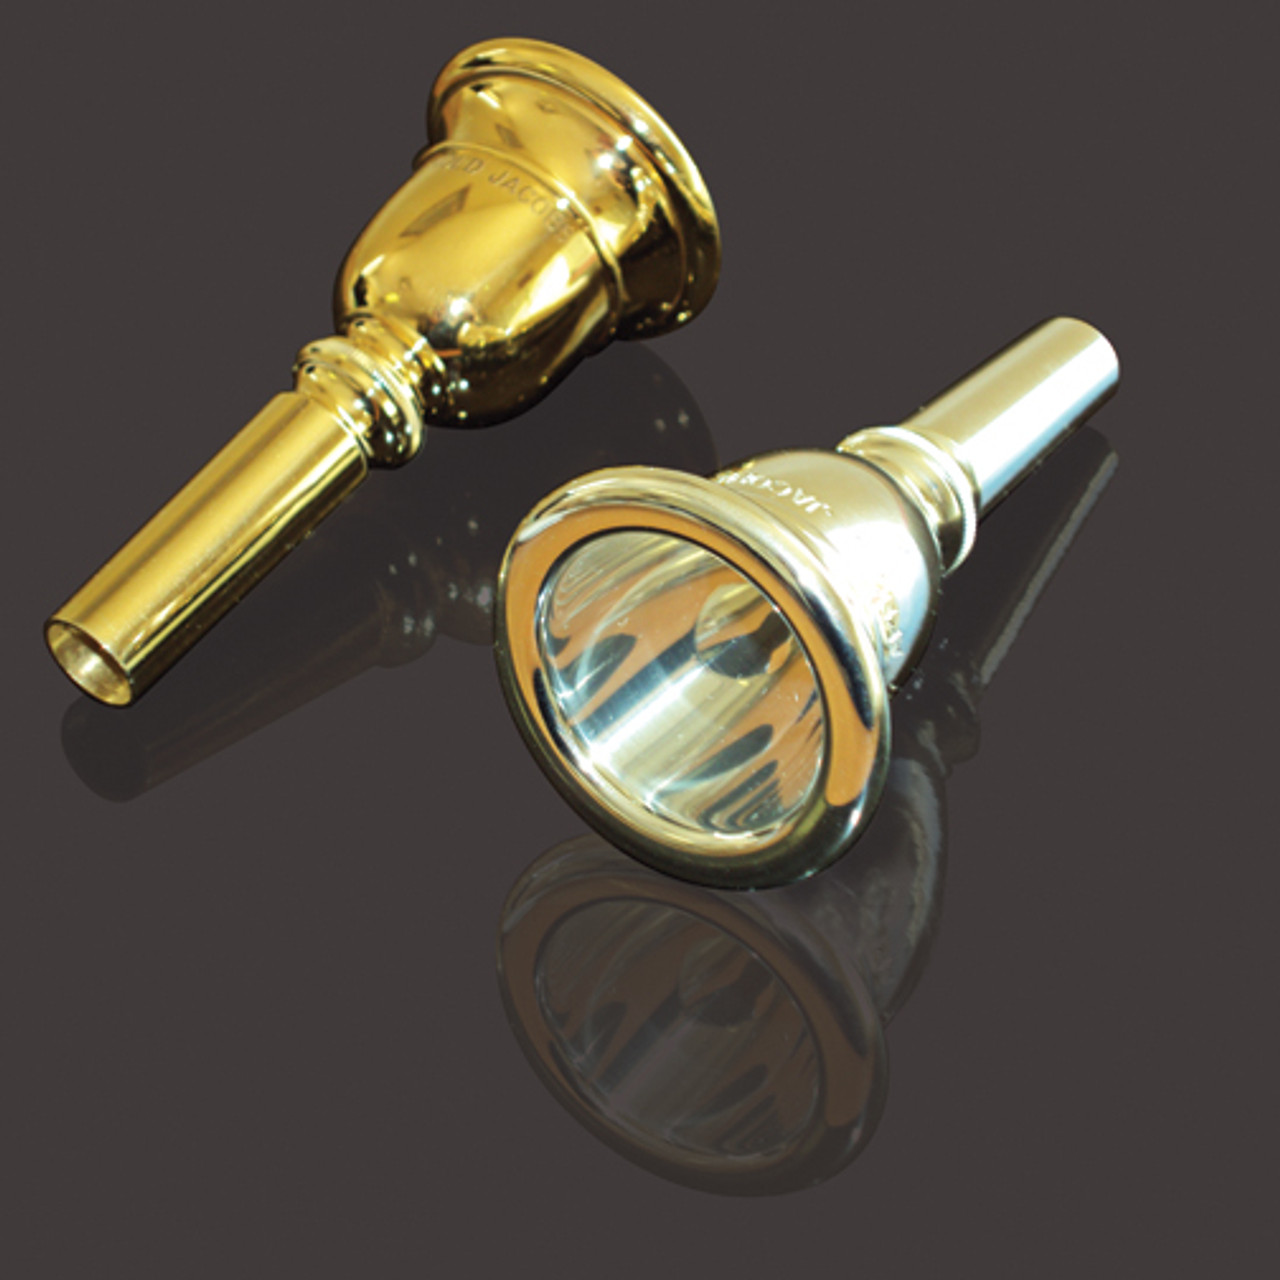 Home - Instrument Accessories - Arnold Jacobs Heritage Tuba Mouthpiece